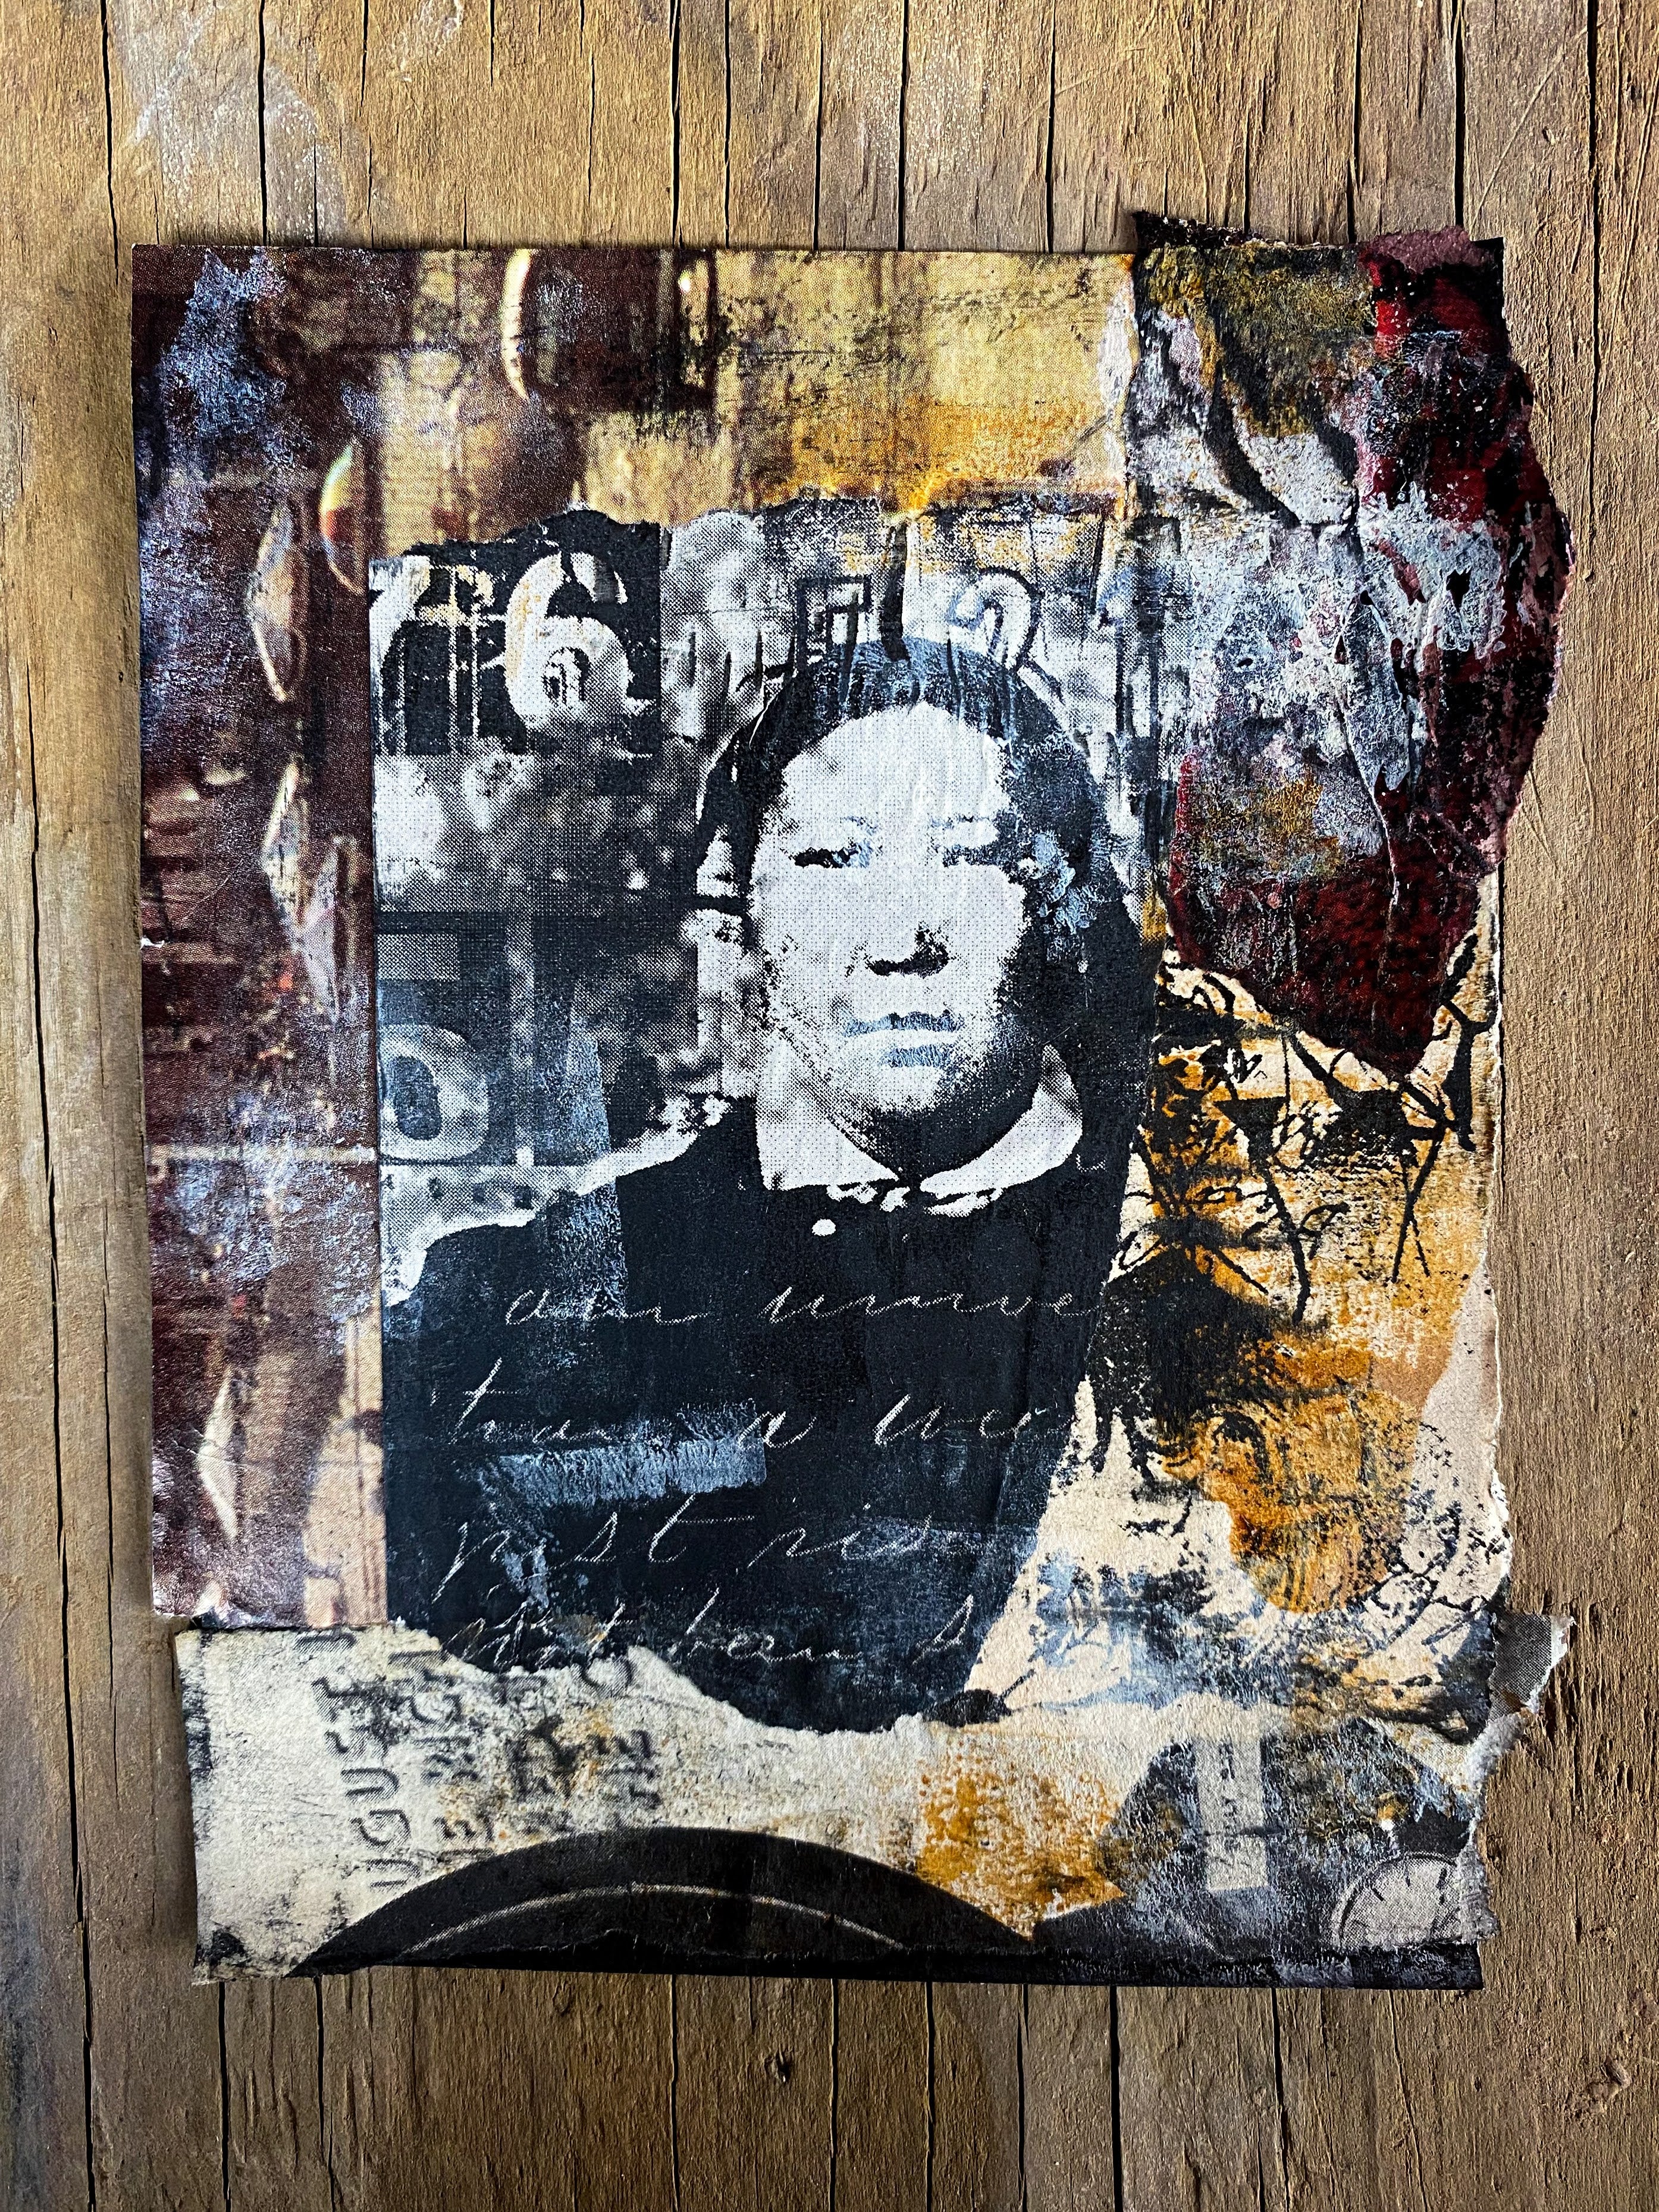 The Record Keeper - Original Mixed Media Collage